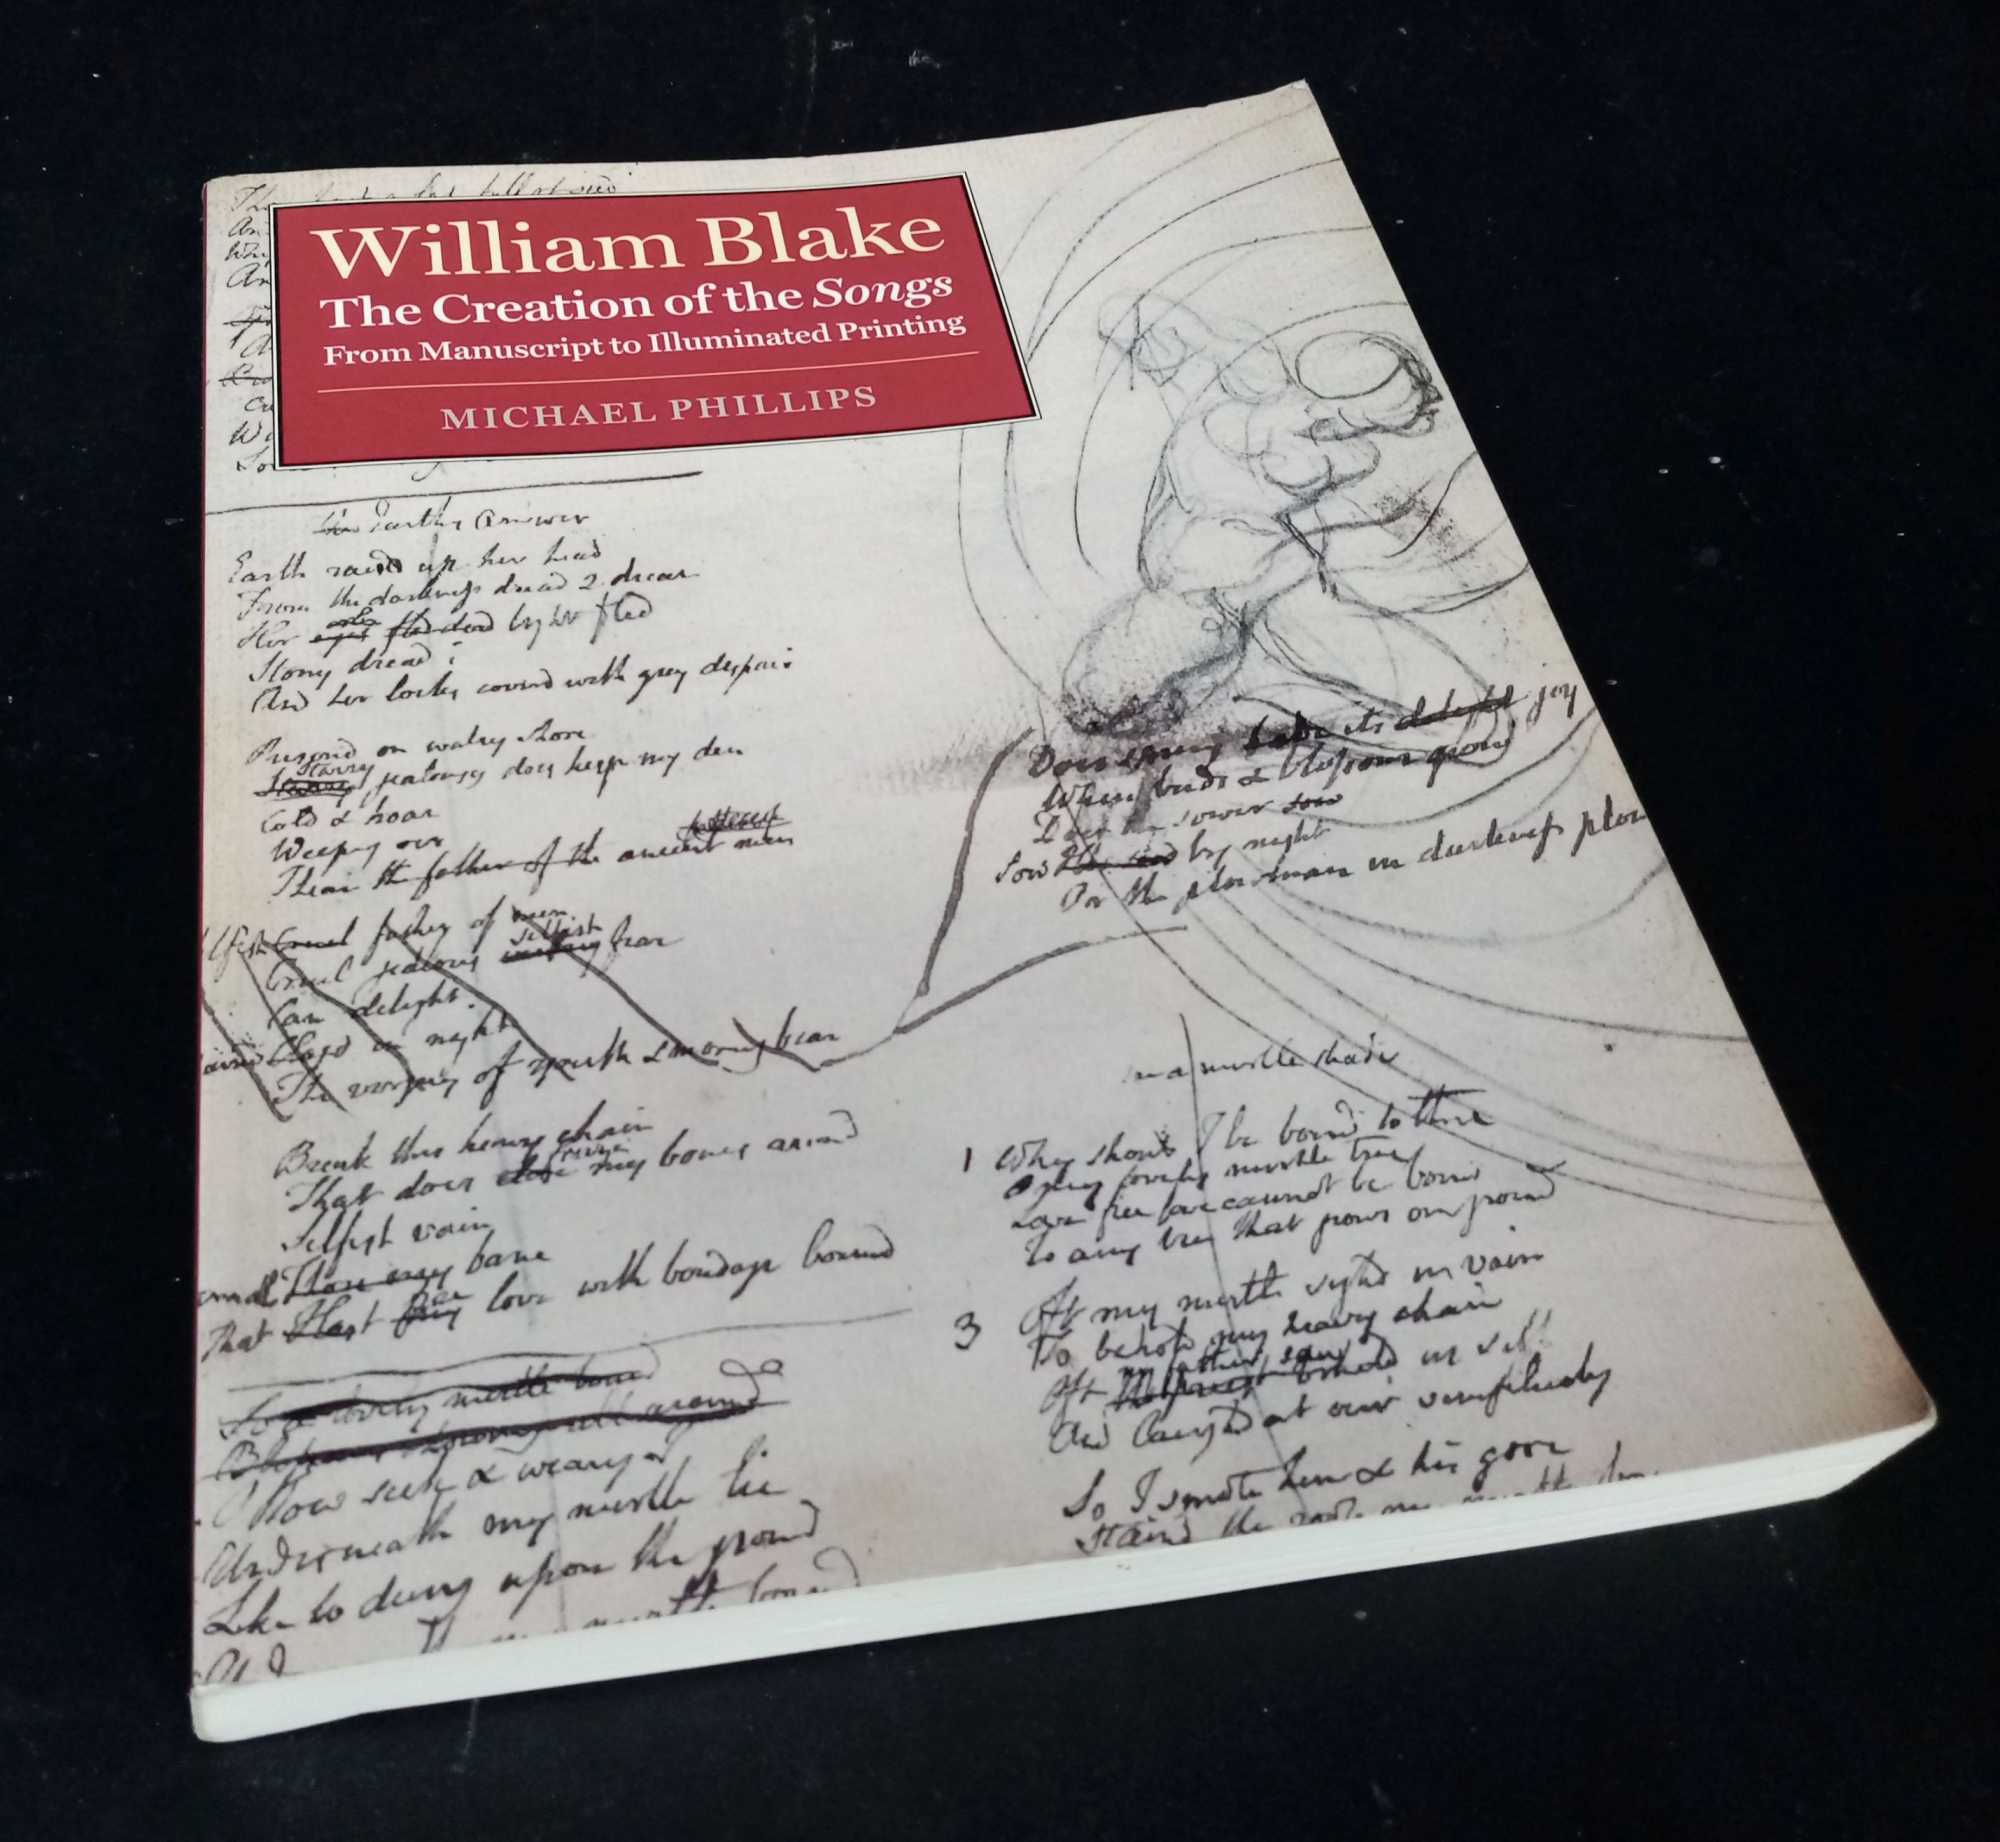 Michael Phillips - William Blake: The Creation of the Songs